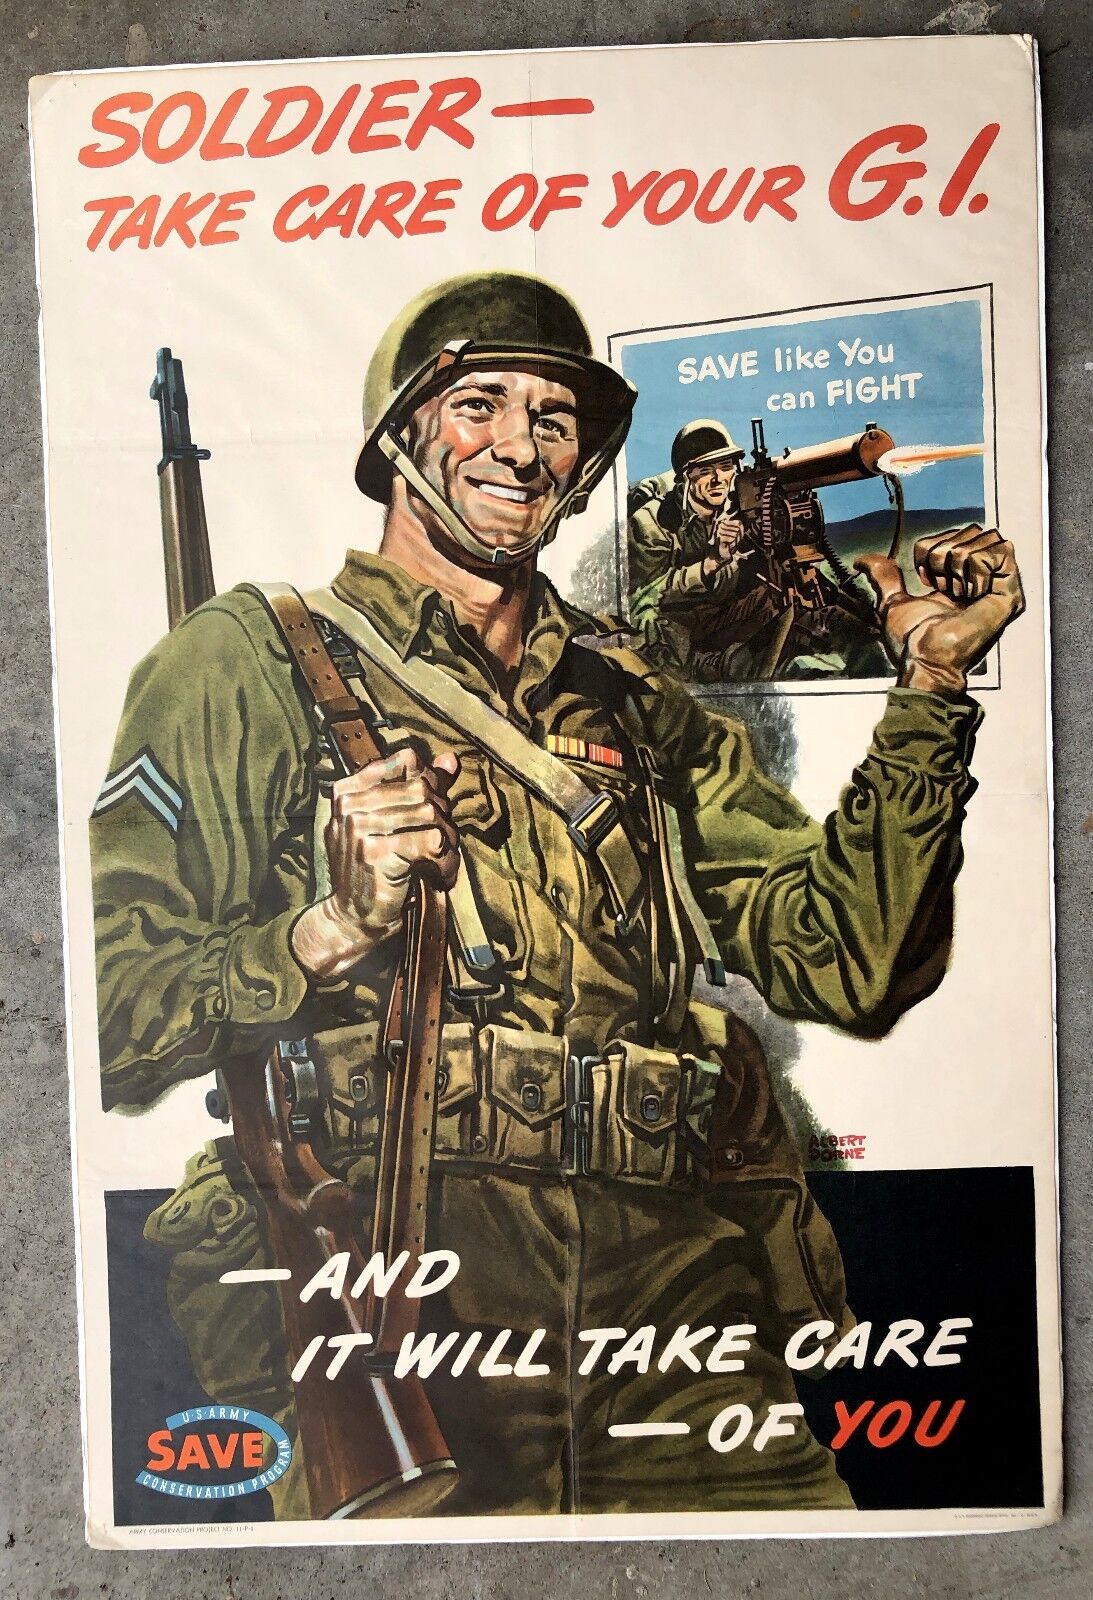 Authentic 1943 WWII Poster- Soldier Take Care of Your G.I. -- Smiling Soldier